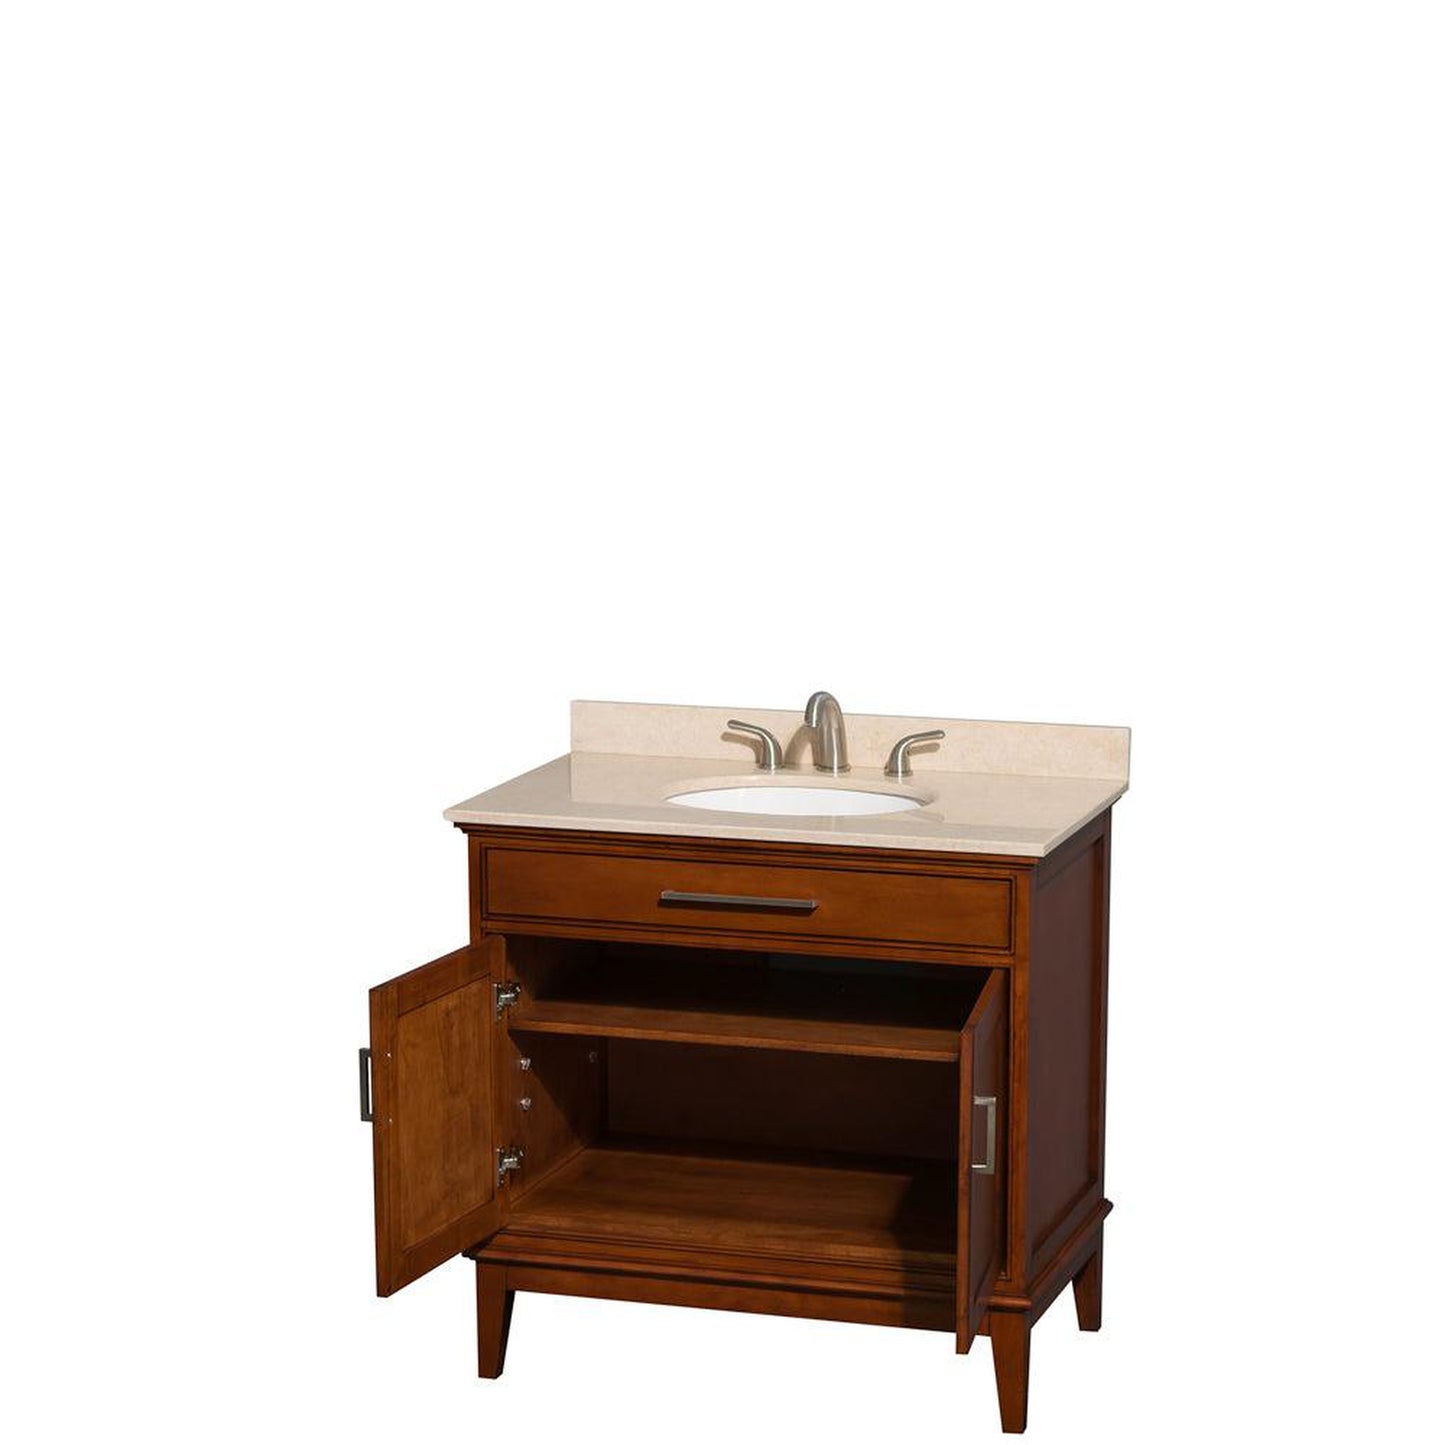 Wyndham Collection Hatton 36" Single Bathroom Vanity in Light Chestnut, Ivory Marble Countertop, Undermount Oval Sink, and No Mirror